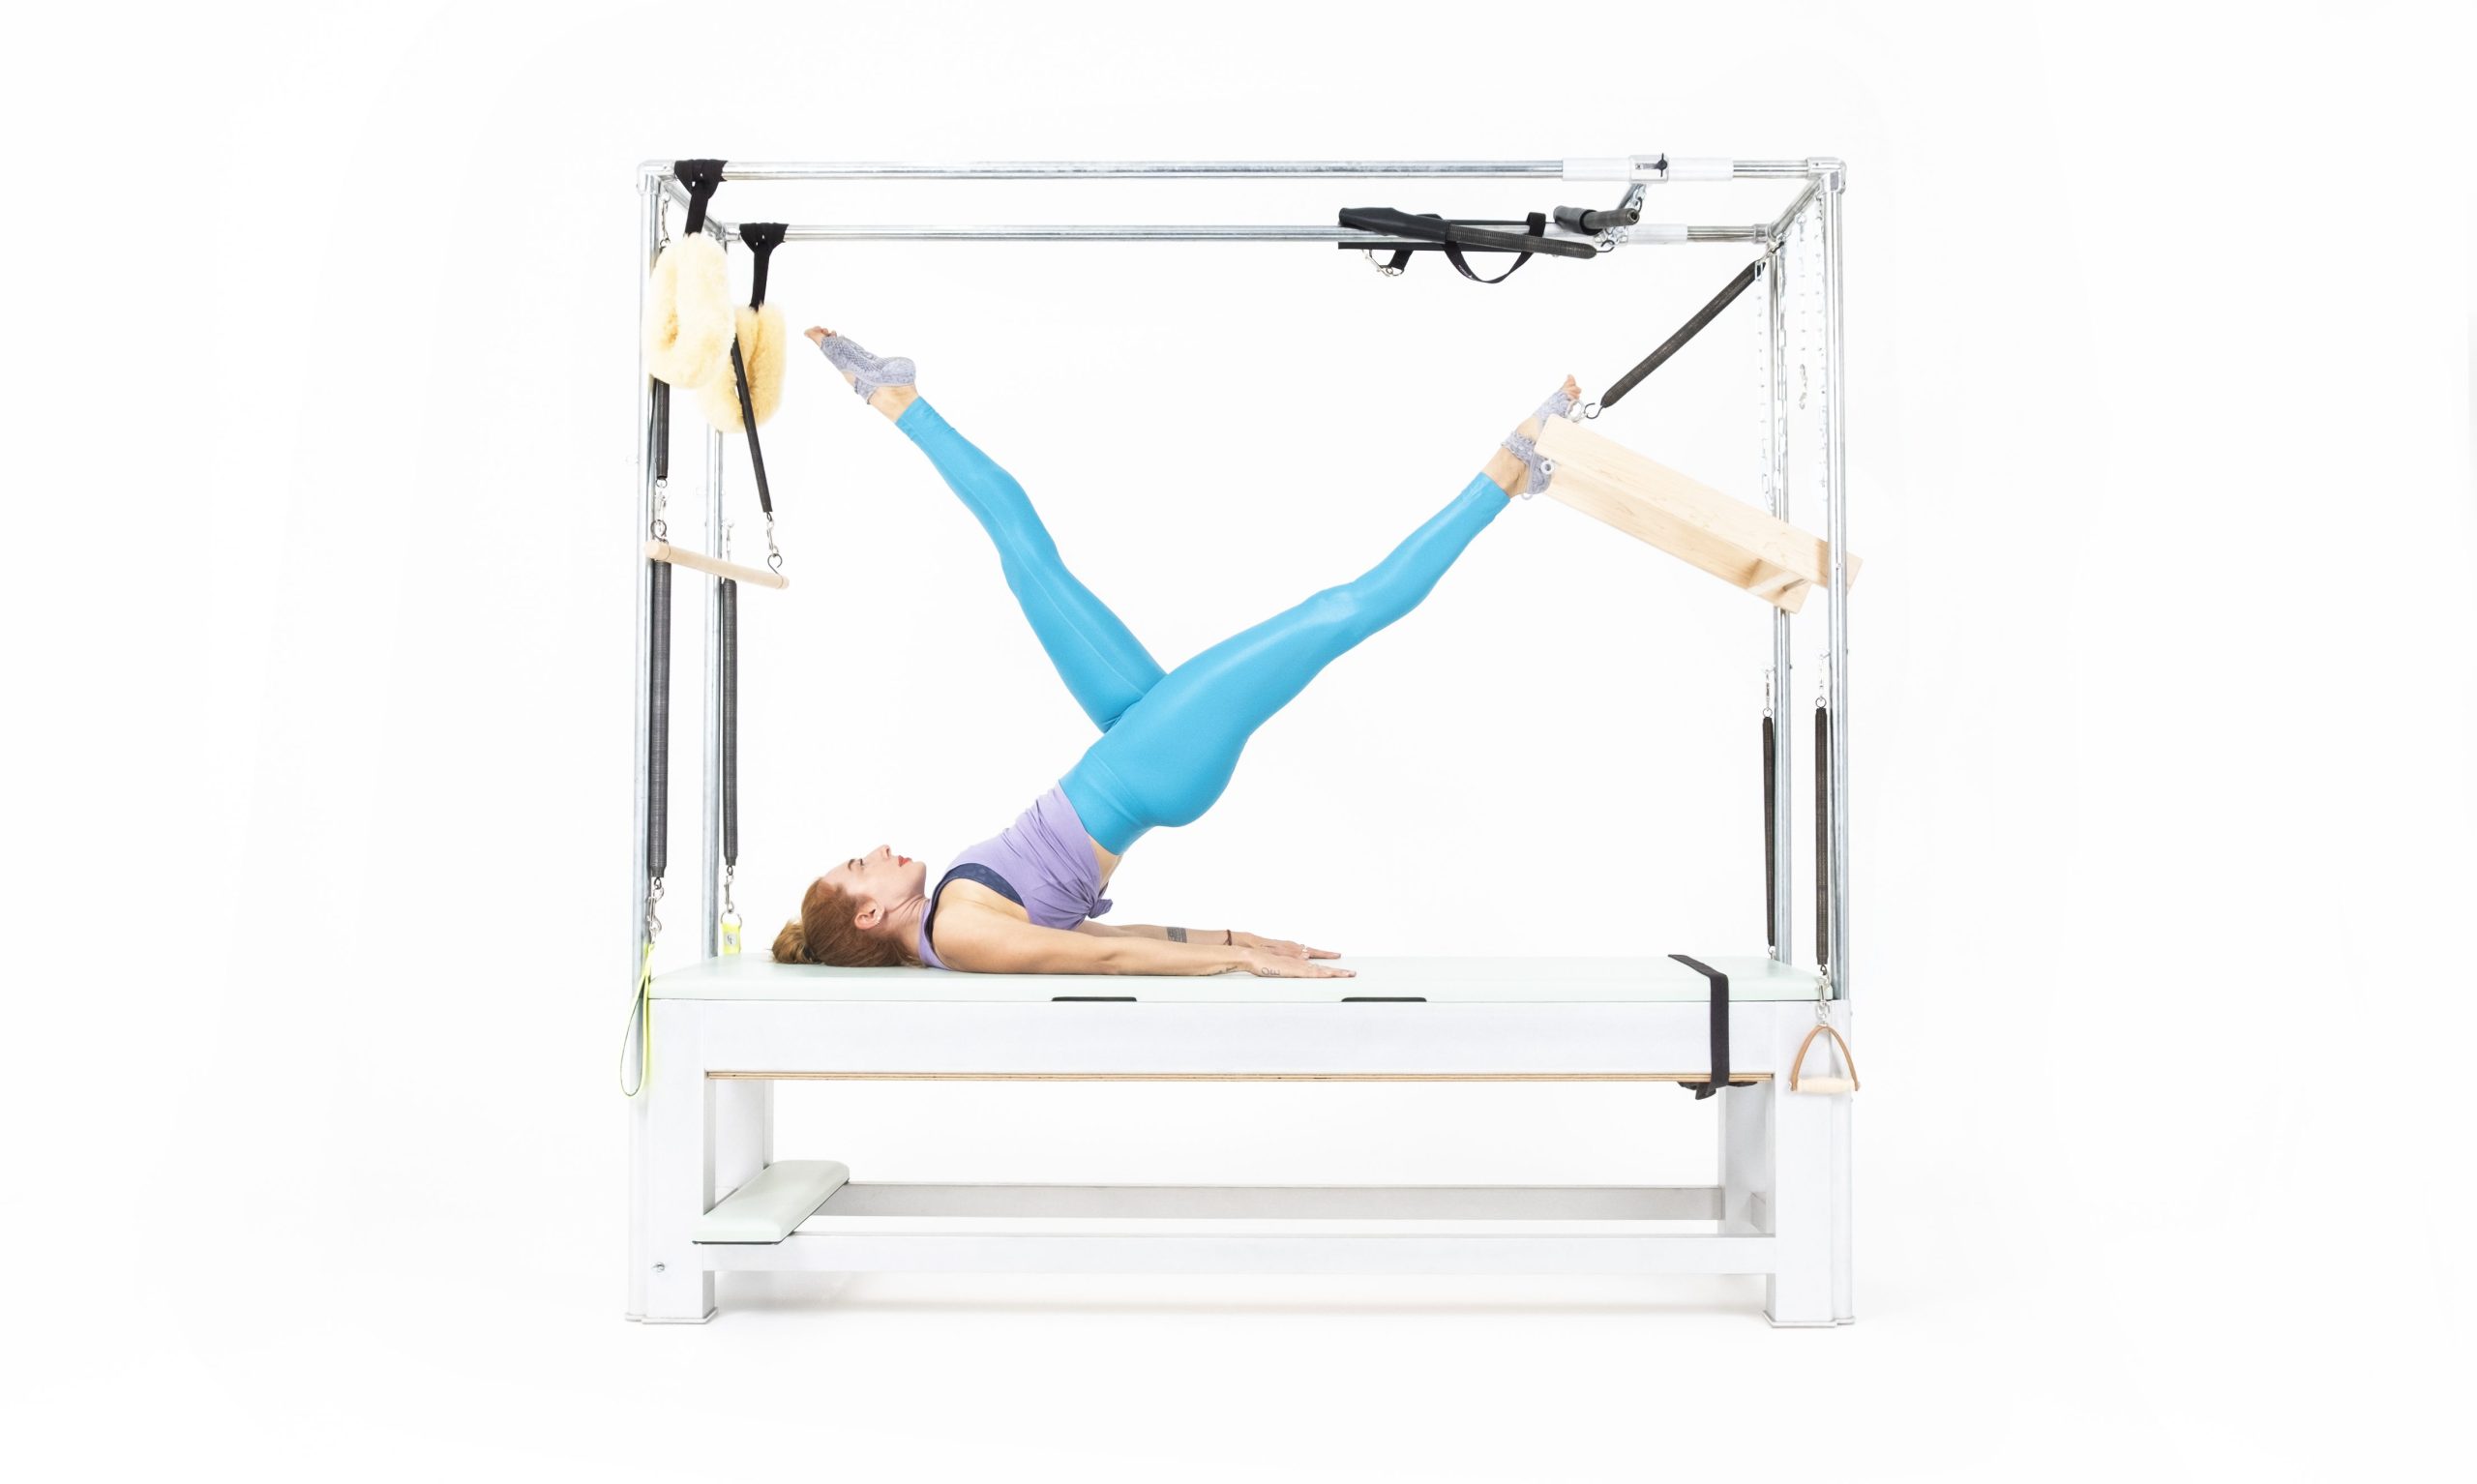 Shoulder-Roll-Down-with-Push-Thru-Bar-on-the-Cadillac-or-Tower-Online-Pilates-Classes